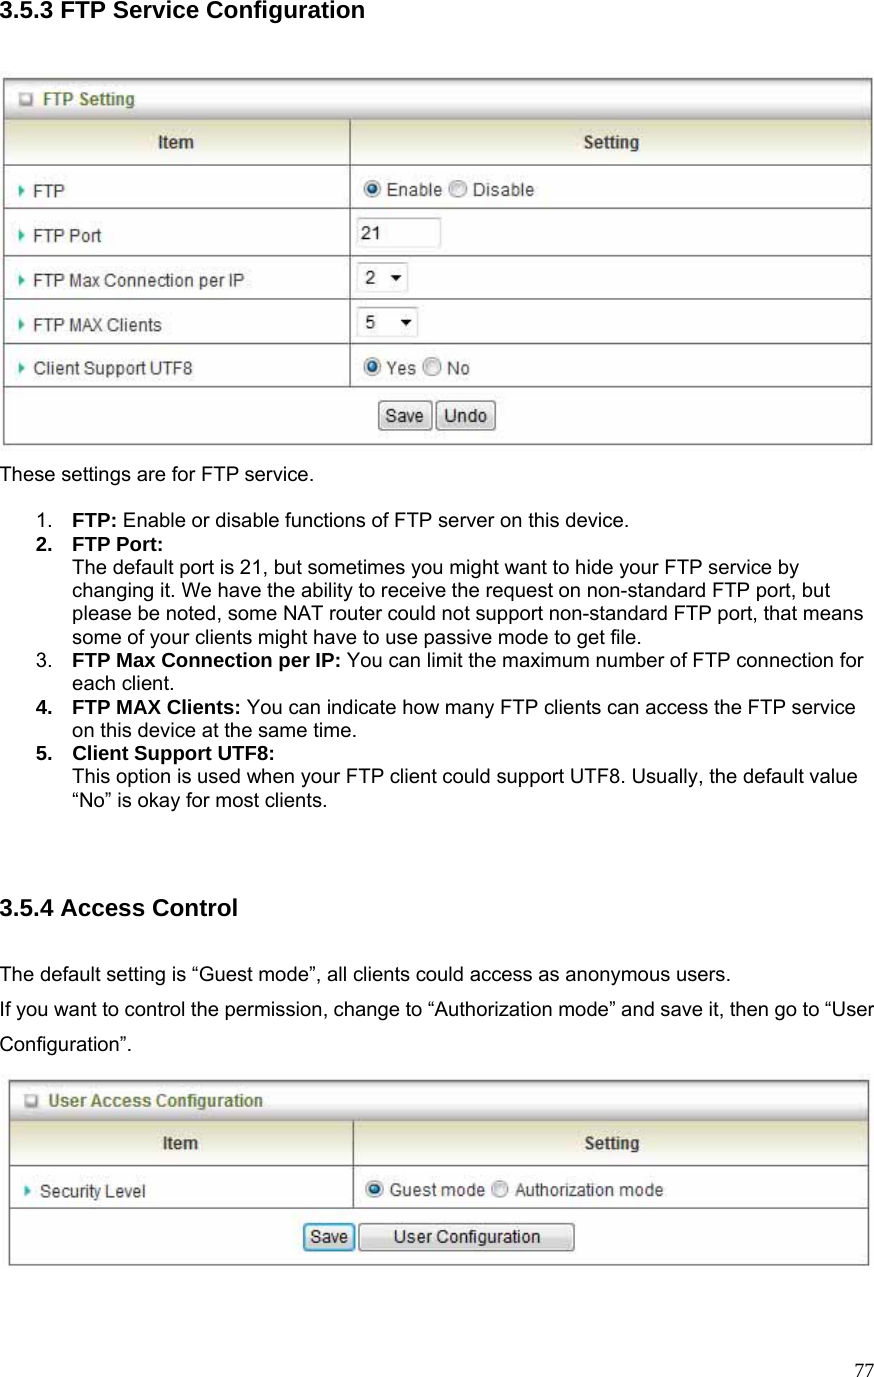  773.5.3 FTP Service Configuration   These settings are for FTP service.  1.  FTP: Enable or disable functions of FTP server on this device. 2. FTP Port: The default port is 21, but sometimes you might want to hide your FTP service by changing it. We have the ability to receive the request on non-standard FTP port, but please be noted, some NAT router could not support non-standard FTP port, that means some of your clients might have to use passive mode to get file. 3.  FTP Max Connection per IP: You can limit the maximum number of FTP connection for each client. 4. FTP MAX Clients: You can indicate how many FTP clients can access the FTP service on this device at the same time.   5.  Client Support UTF8: This option is used when your FTP client could support UTF8. Usually, the default value “No” is okay for most clients.   3.5.4 Access Control  The default setting is “Guest mode”, all clients could access as anonymous users. If you want to control the permission, change to “Authorization mode” and save it, then go to “User Configuration”.   